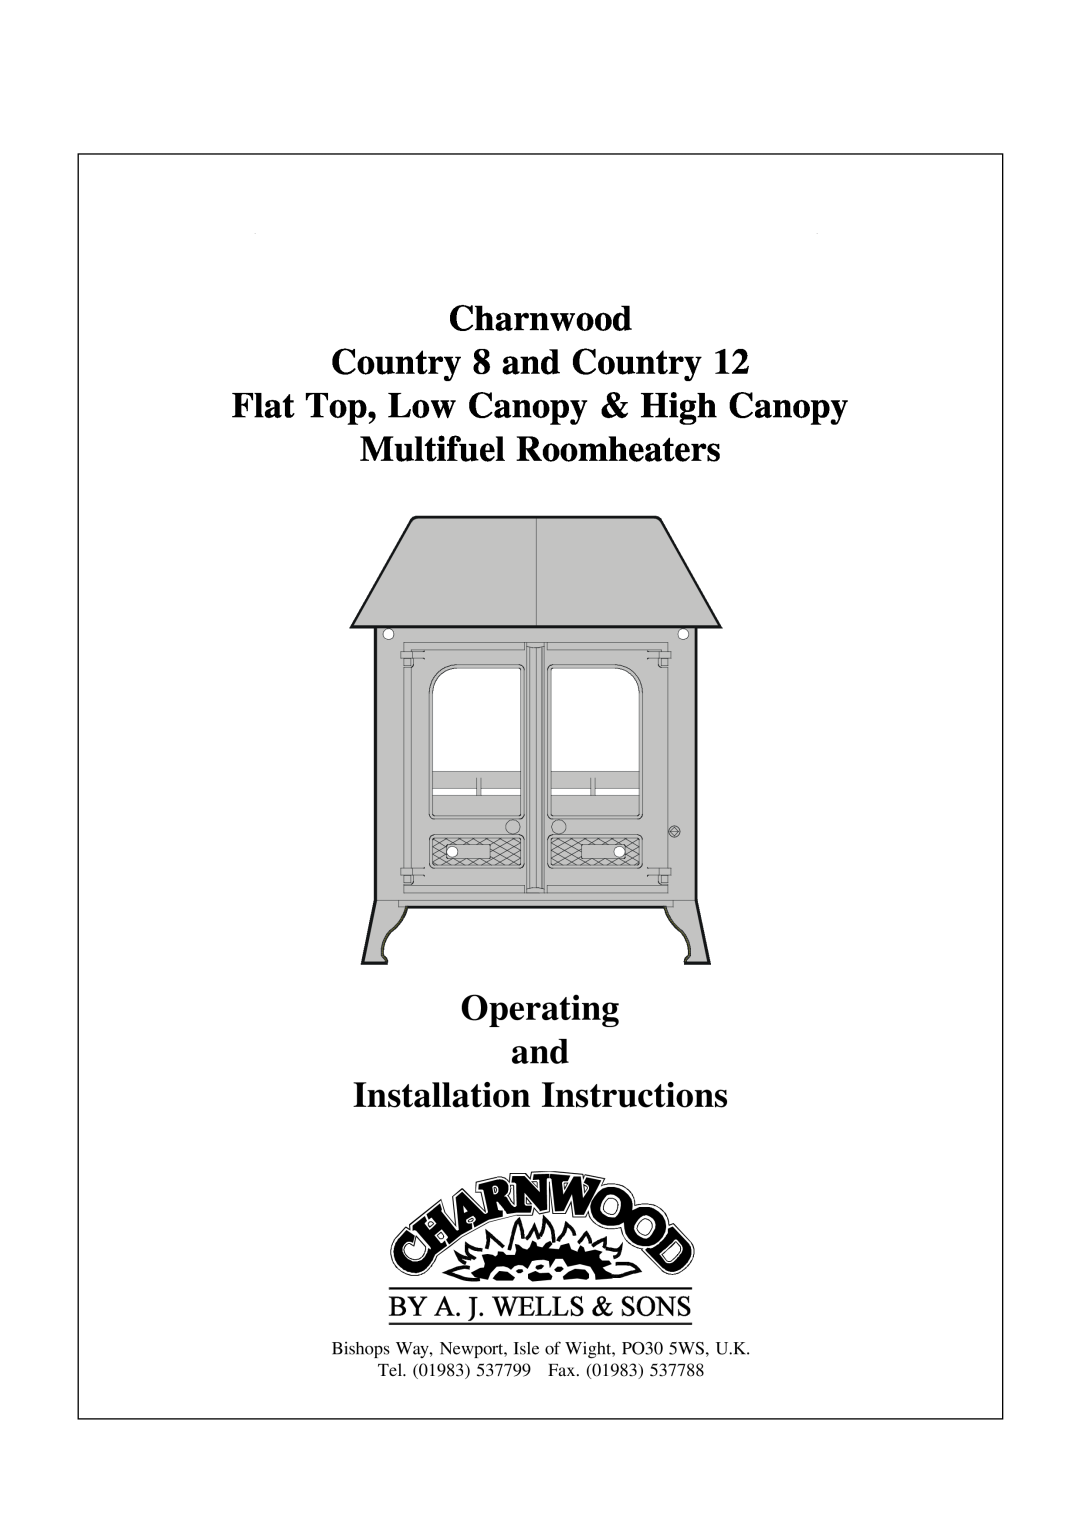 Charnwood Country 12 installation instructions Charnwood Country 8 and Country, Flat Top, Low Canopy & High Canopy 